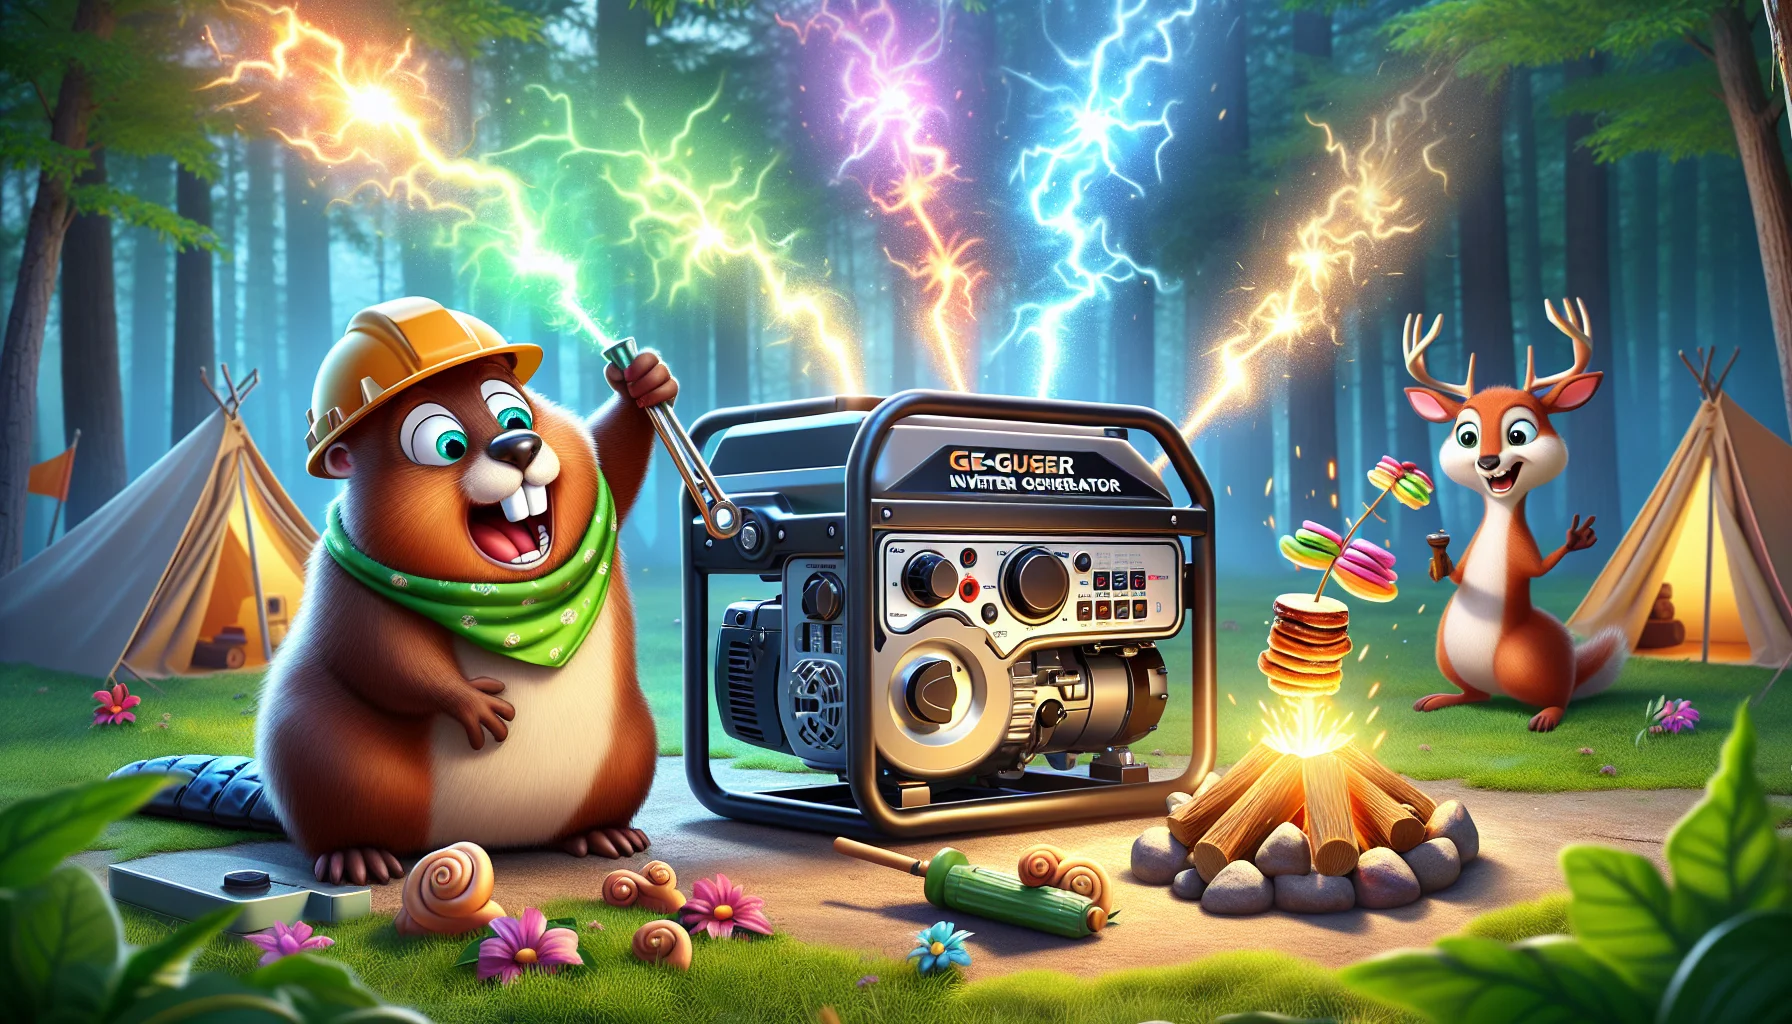 Picture a whimsical scene featuring a high-quality inverter generator set in a comical outdoor setting. The generator is well-loved, with a shiny exterior and a robust form, placed amidst a green campsite setting. Quirky characters such as a large beaver in a luminous hard hat are trying to generate electricity by cranking the generator handle. Nearby, a squirrel with a surprised expression on its face watches in awe as multiple colorful sparks fly out of the machine, displaying how spectacularly effective the generator is at producing power. A toasting marshmallow on a stick, glowing with flickering light, indicates the electricity is functioning fantastically.